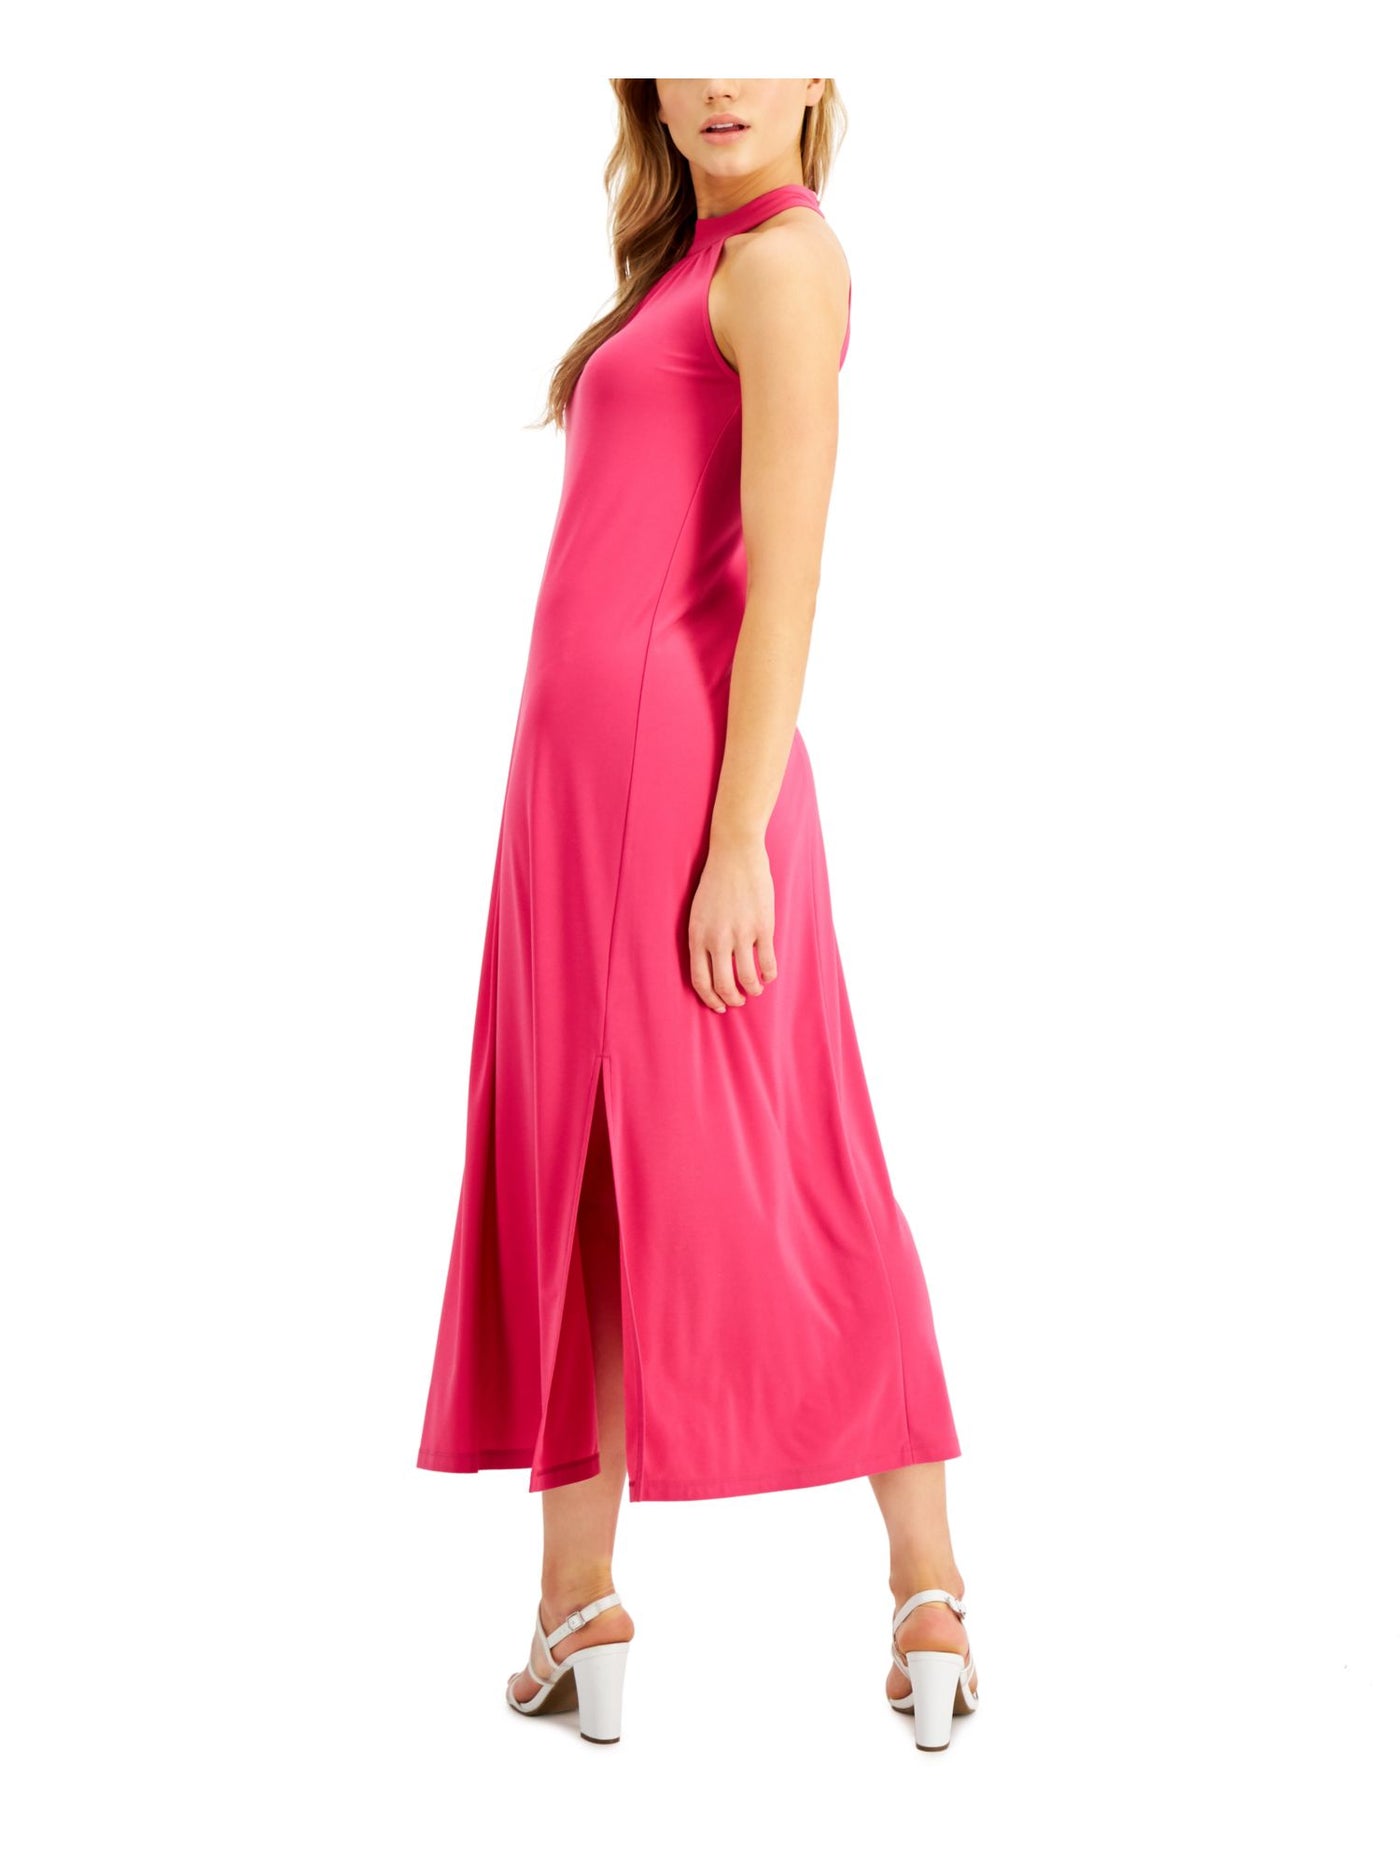 BAR III DRESSES Womens Stretch Ruched Slitted Keyhole, Button Closure Sleeveless Halter Maxi Evening Fit + Flare Dress